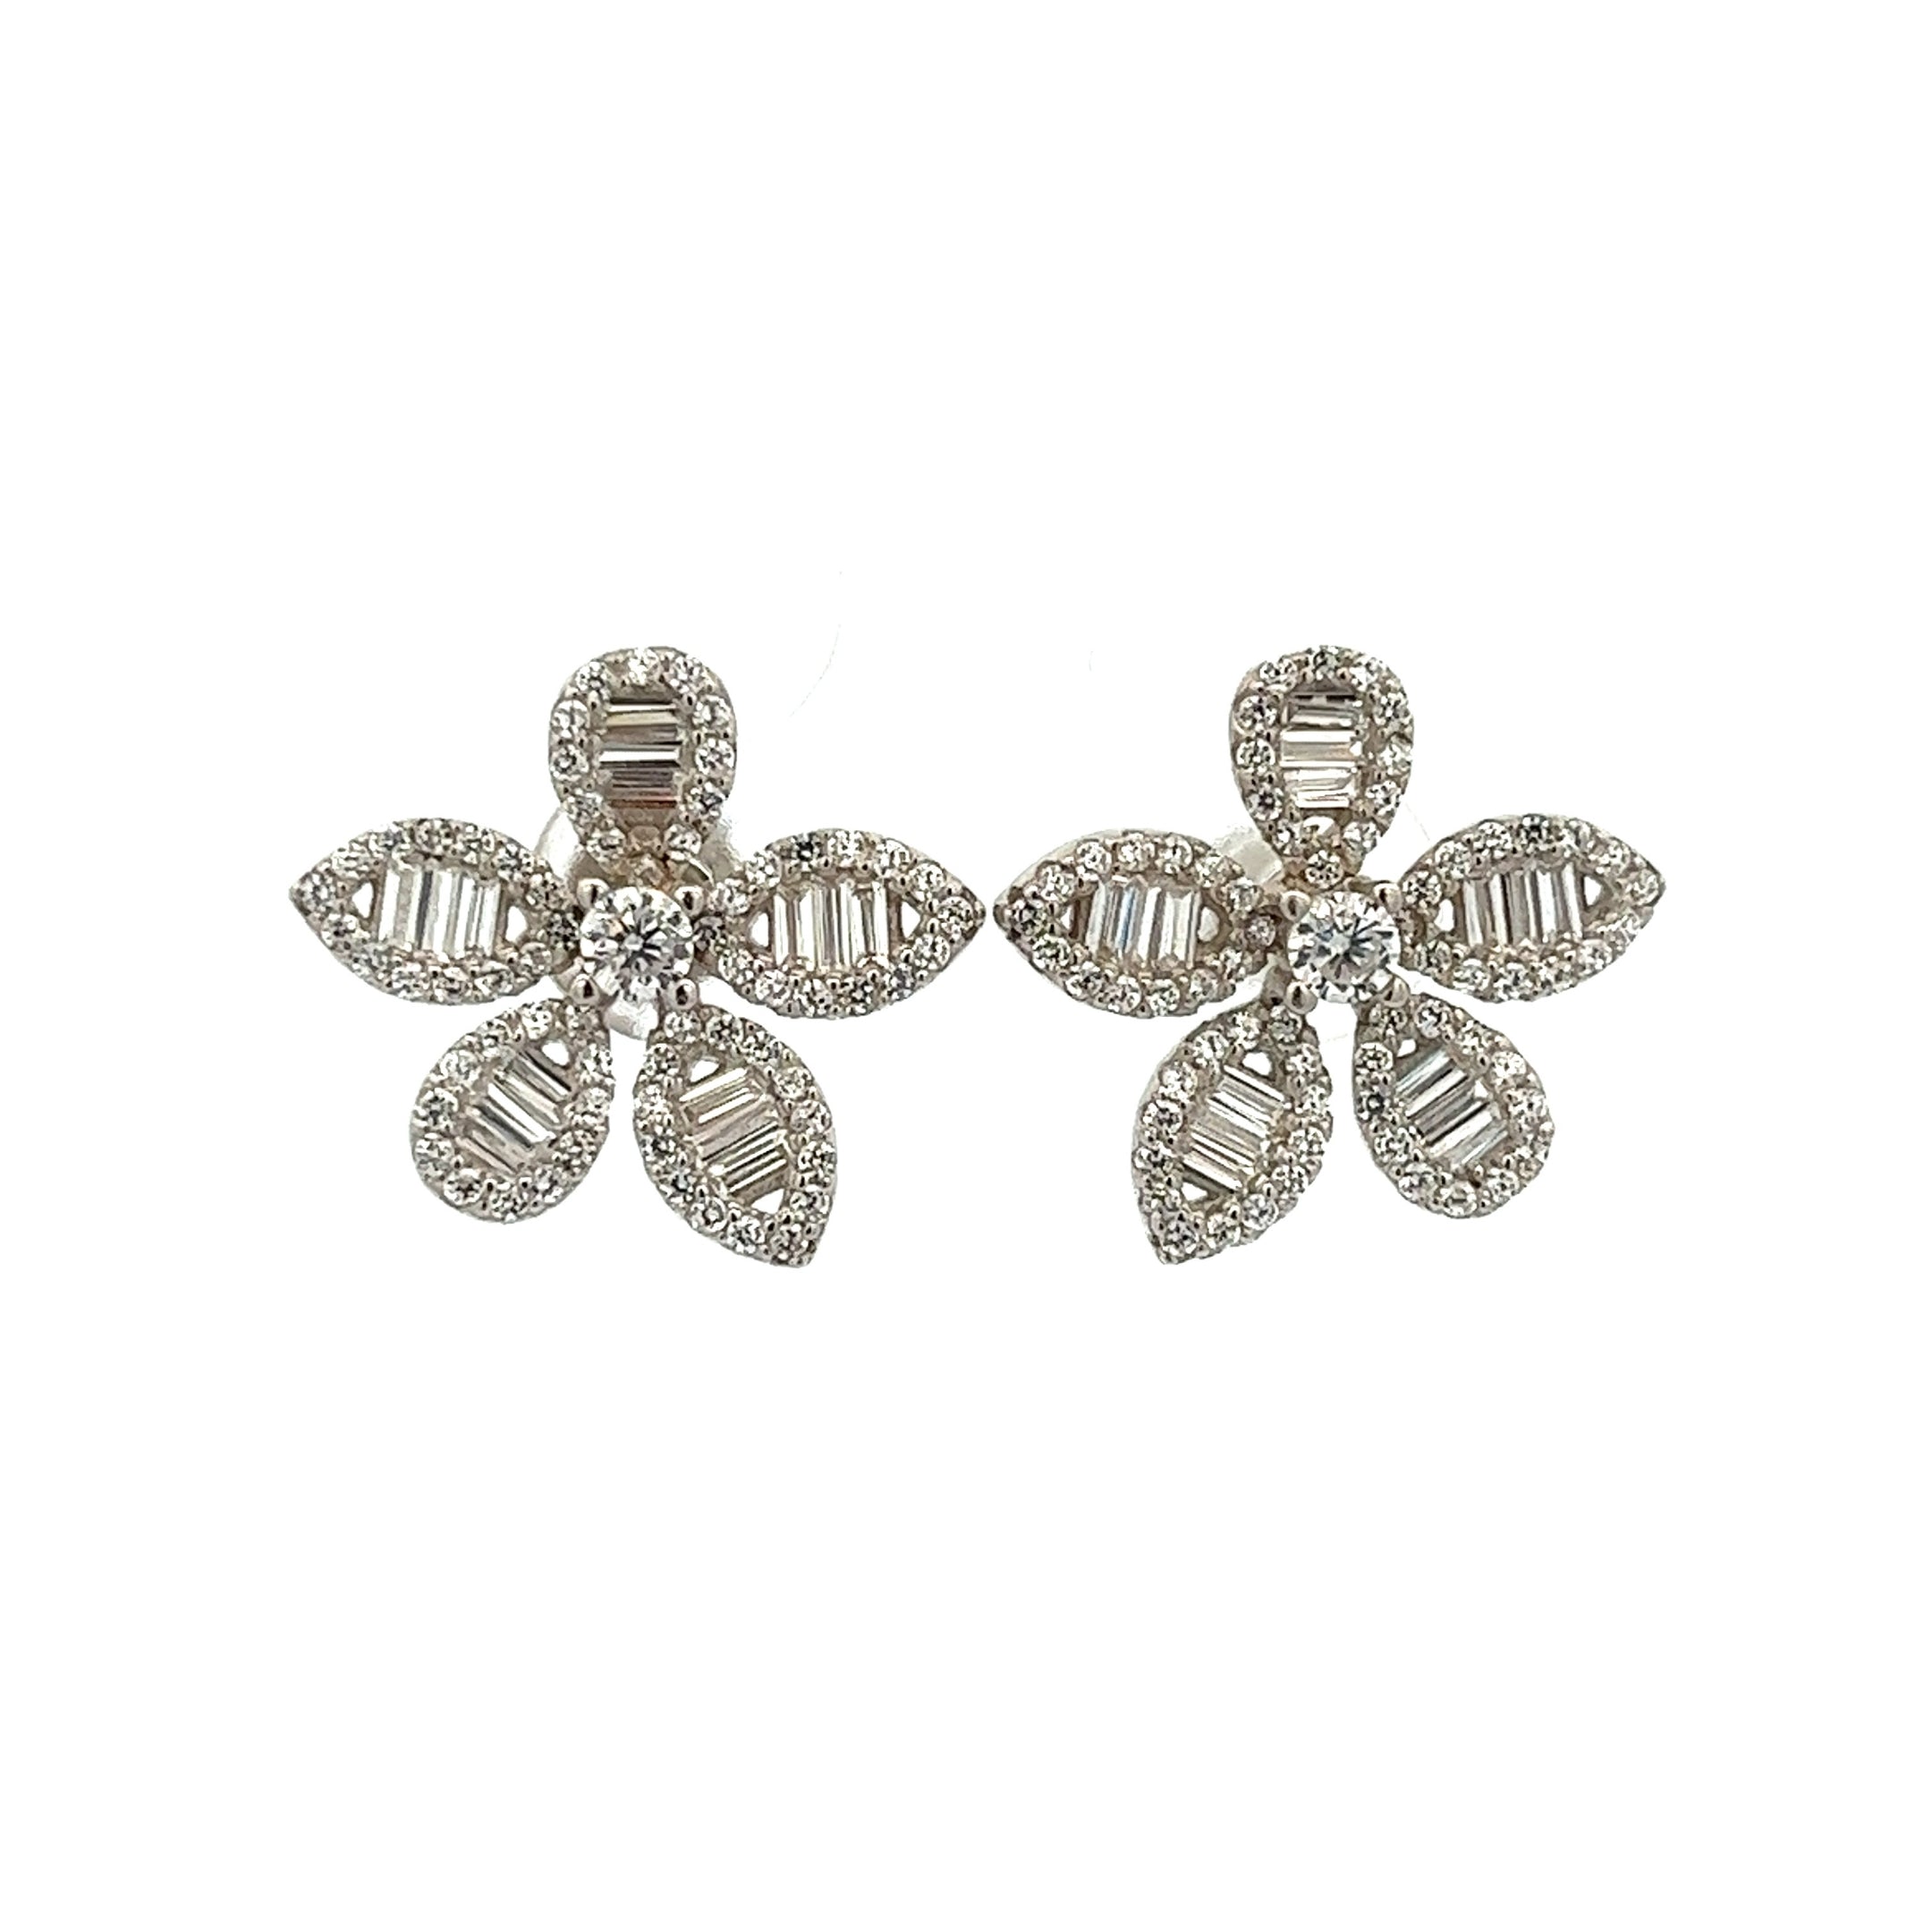 925 SILVER FLOWER EARRINGS WITH CRYSTALS